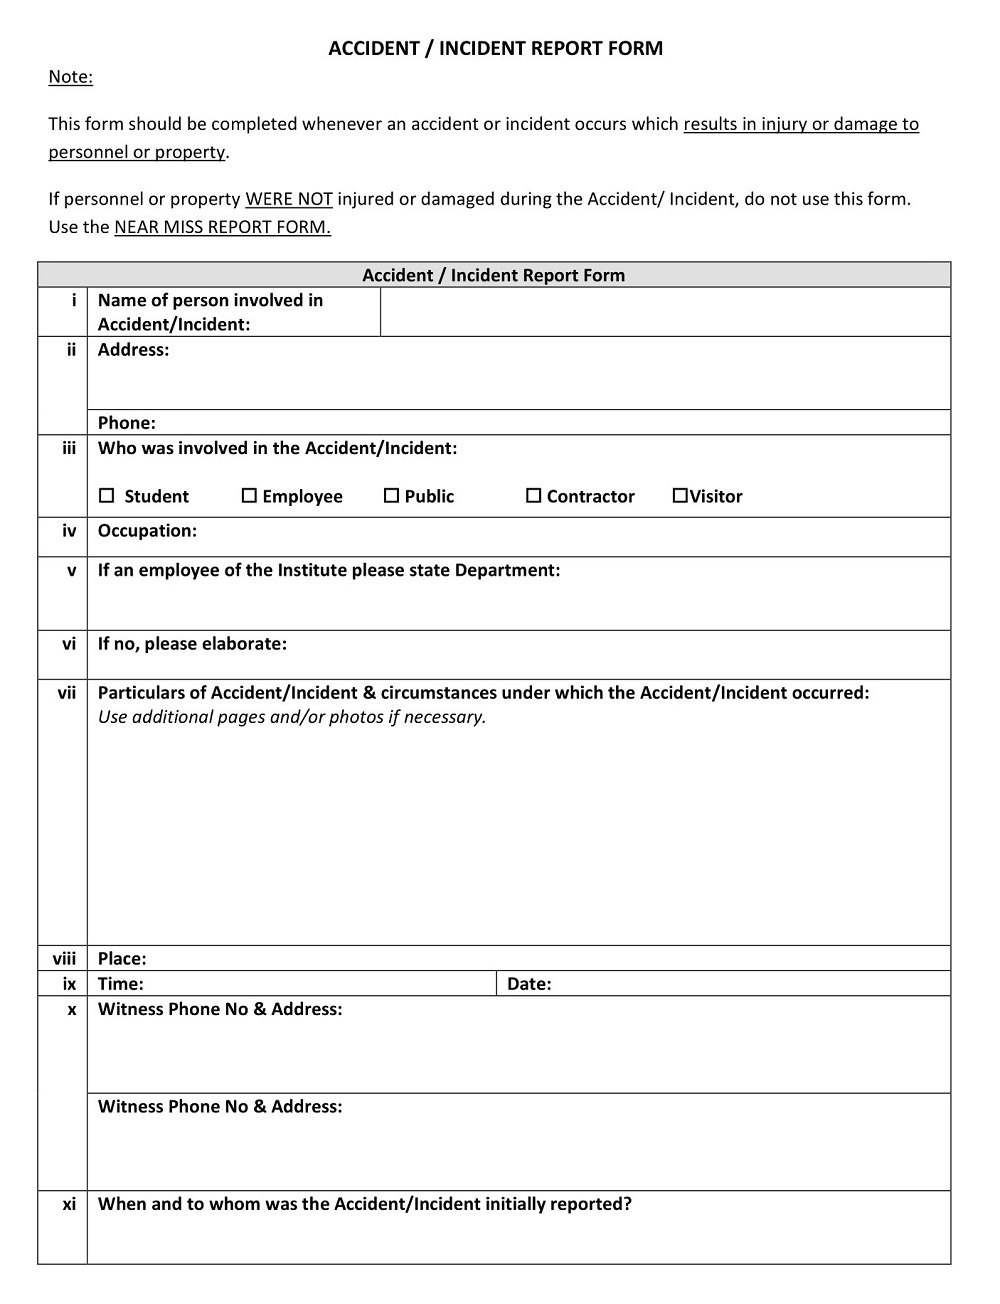 Accident or Incident Report Form